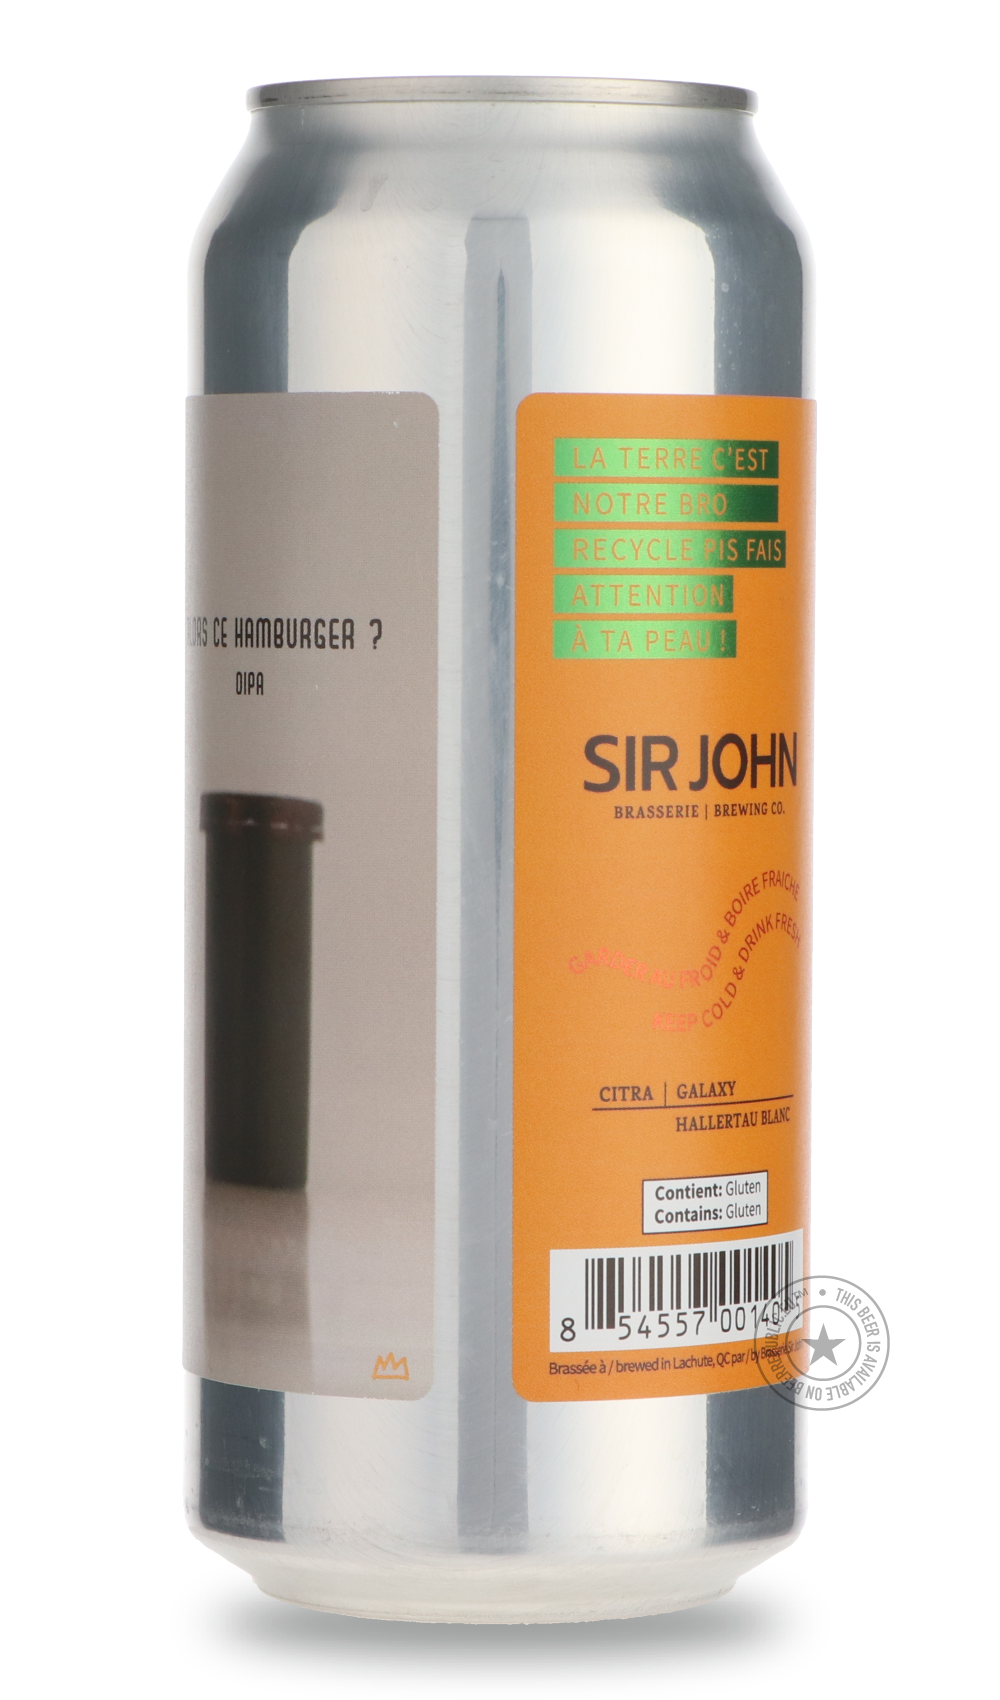 -Sir John- Alors Ce Hamburger?-IPA- Only @ Beer Republic - The best online beer store for American & Canadian craft beer - Buy beer online from the USA and Canada - Bier online kopen - Amerikaans bier kopen - Craft beer store - Craft beer kopen - Amerikanisch bier kaufen - Bier online kaufen - Acheter biere online - IPA - Stout - Porter - New England IPA - Hazy IPA - Imperial Stout - Barrel Aged - Barrel Aged Imperial Stout - Brown - Dark beer - Blond - Blonde - Pilsner - Lager - Wheat - Weizen - Amber - Ba